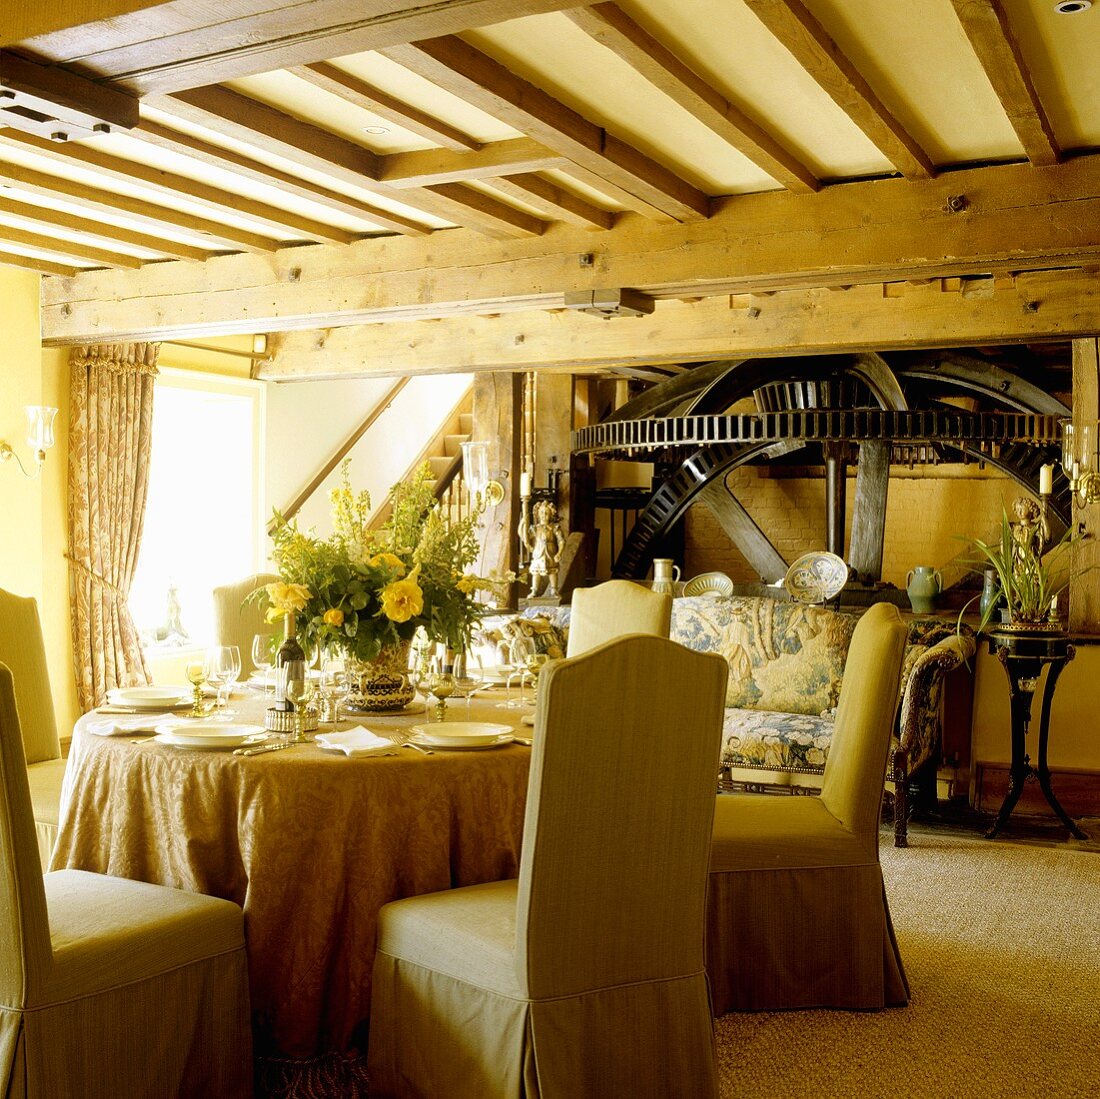 An old English mill house - covered chairs around a laid table in an open-plan living room with a wood beam ceiling